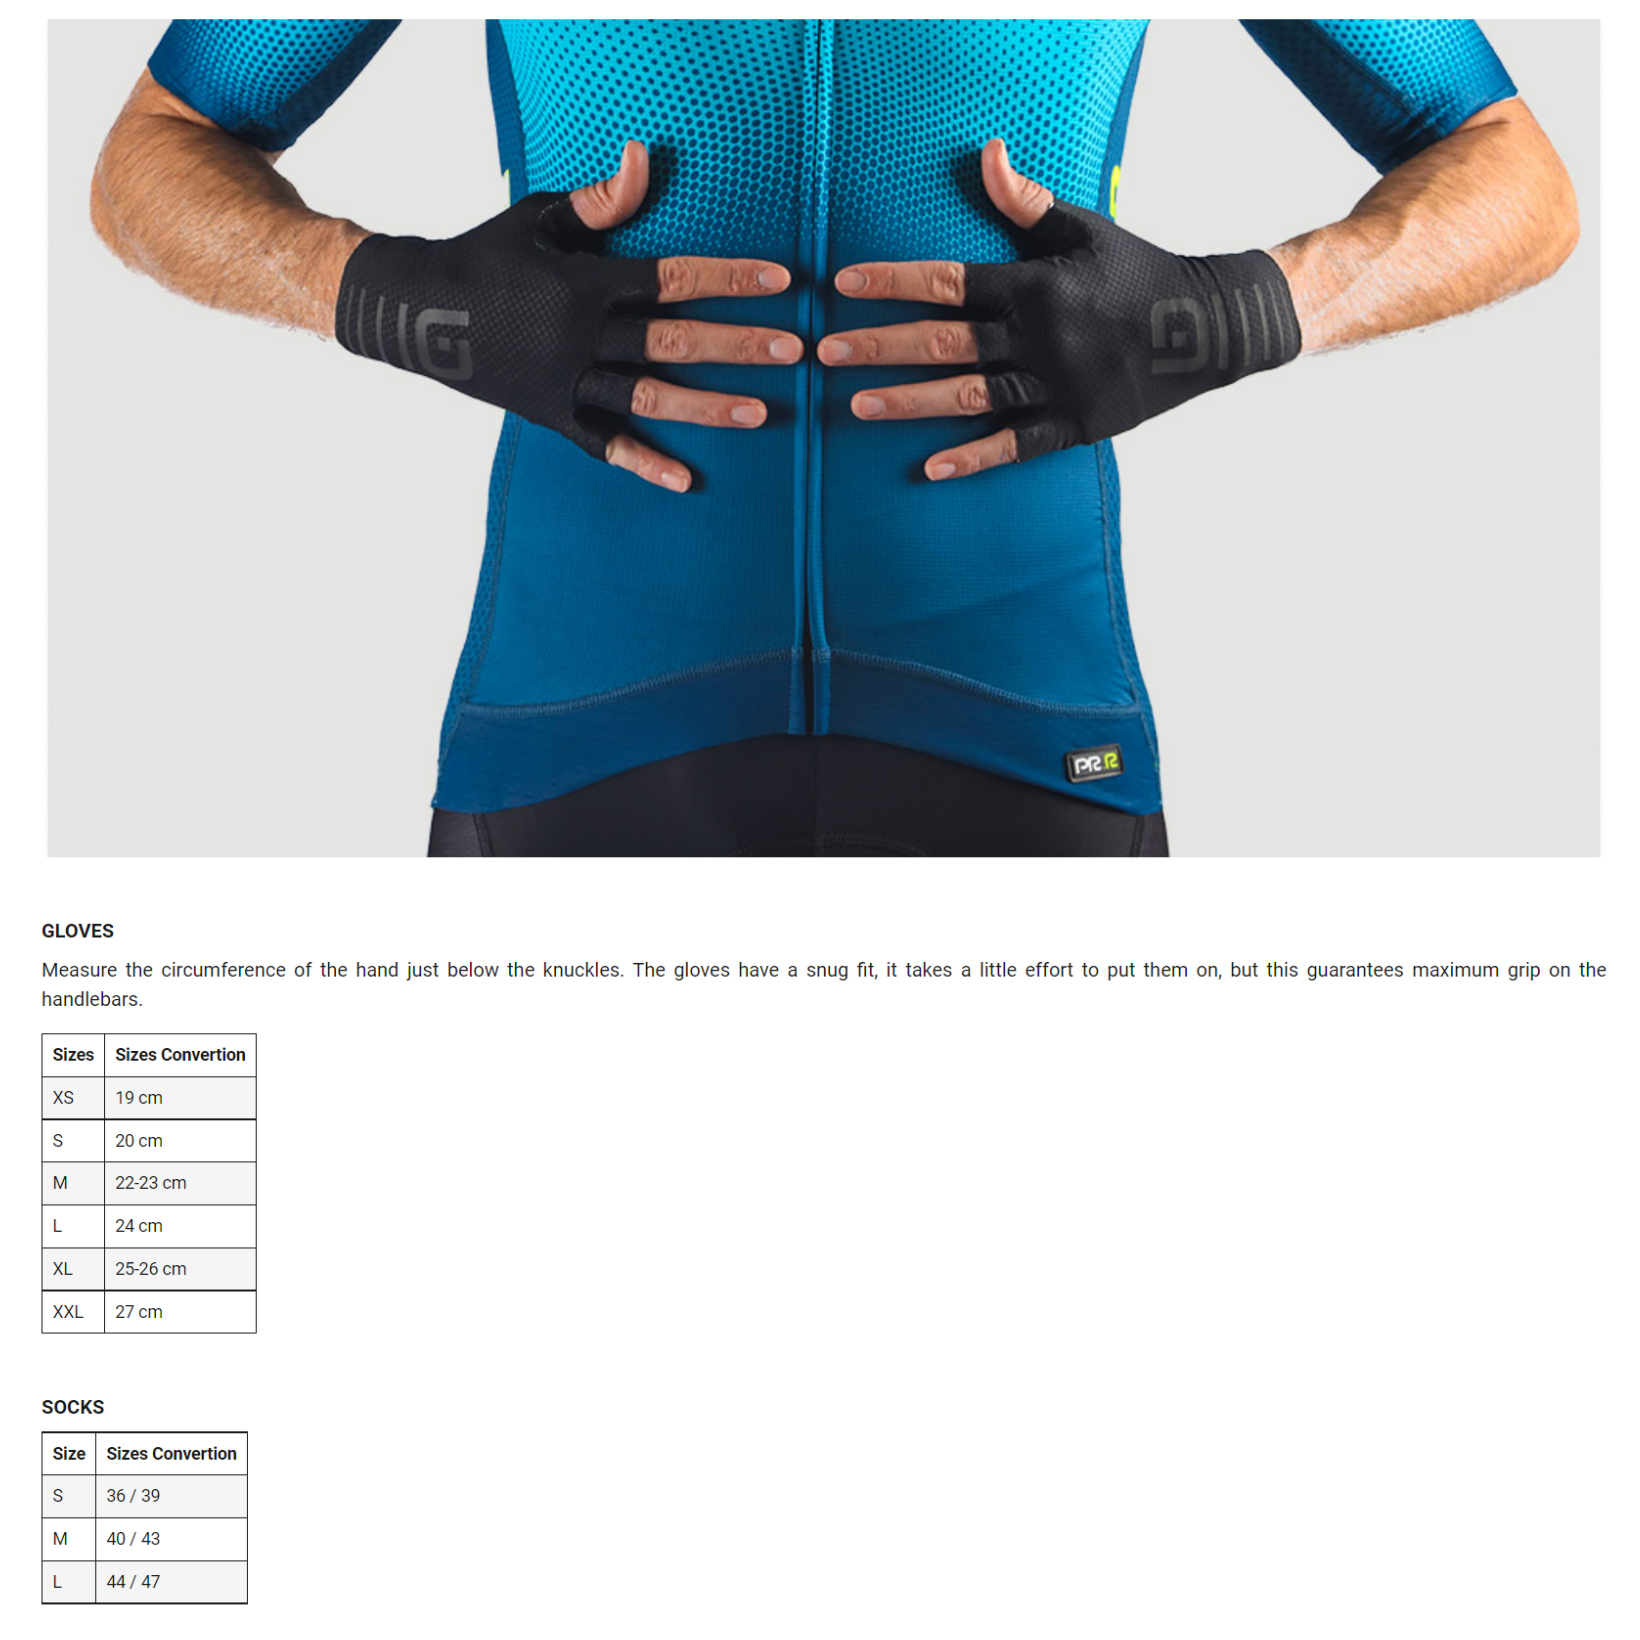 Ale-Cycling-Gloves&Socks-Size-Guide